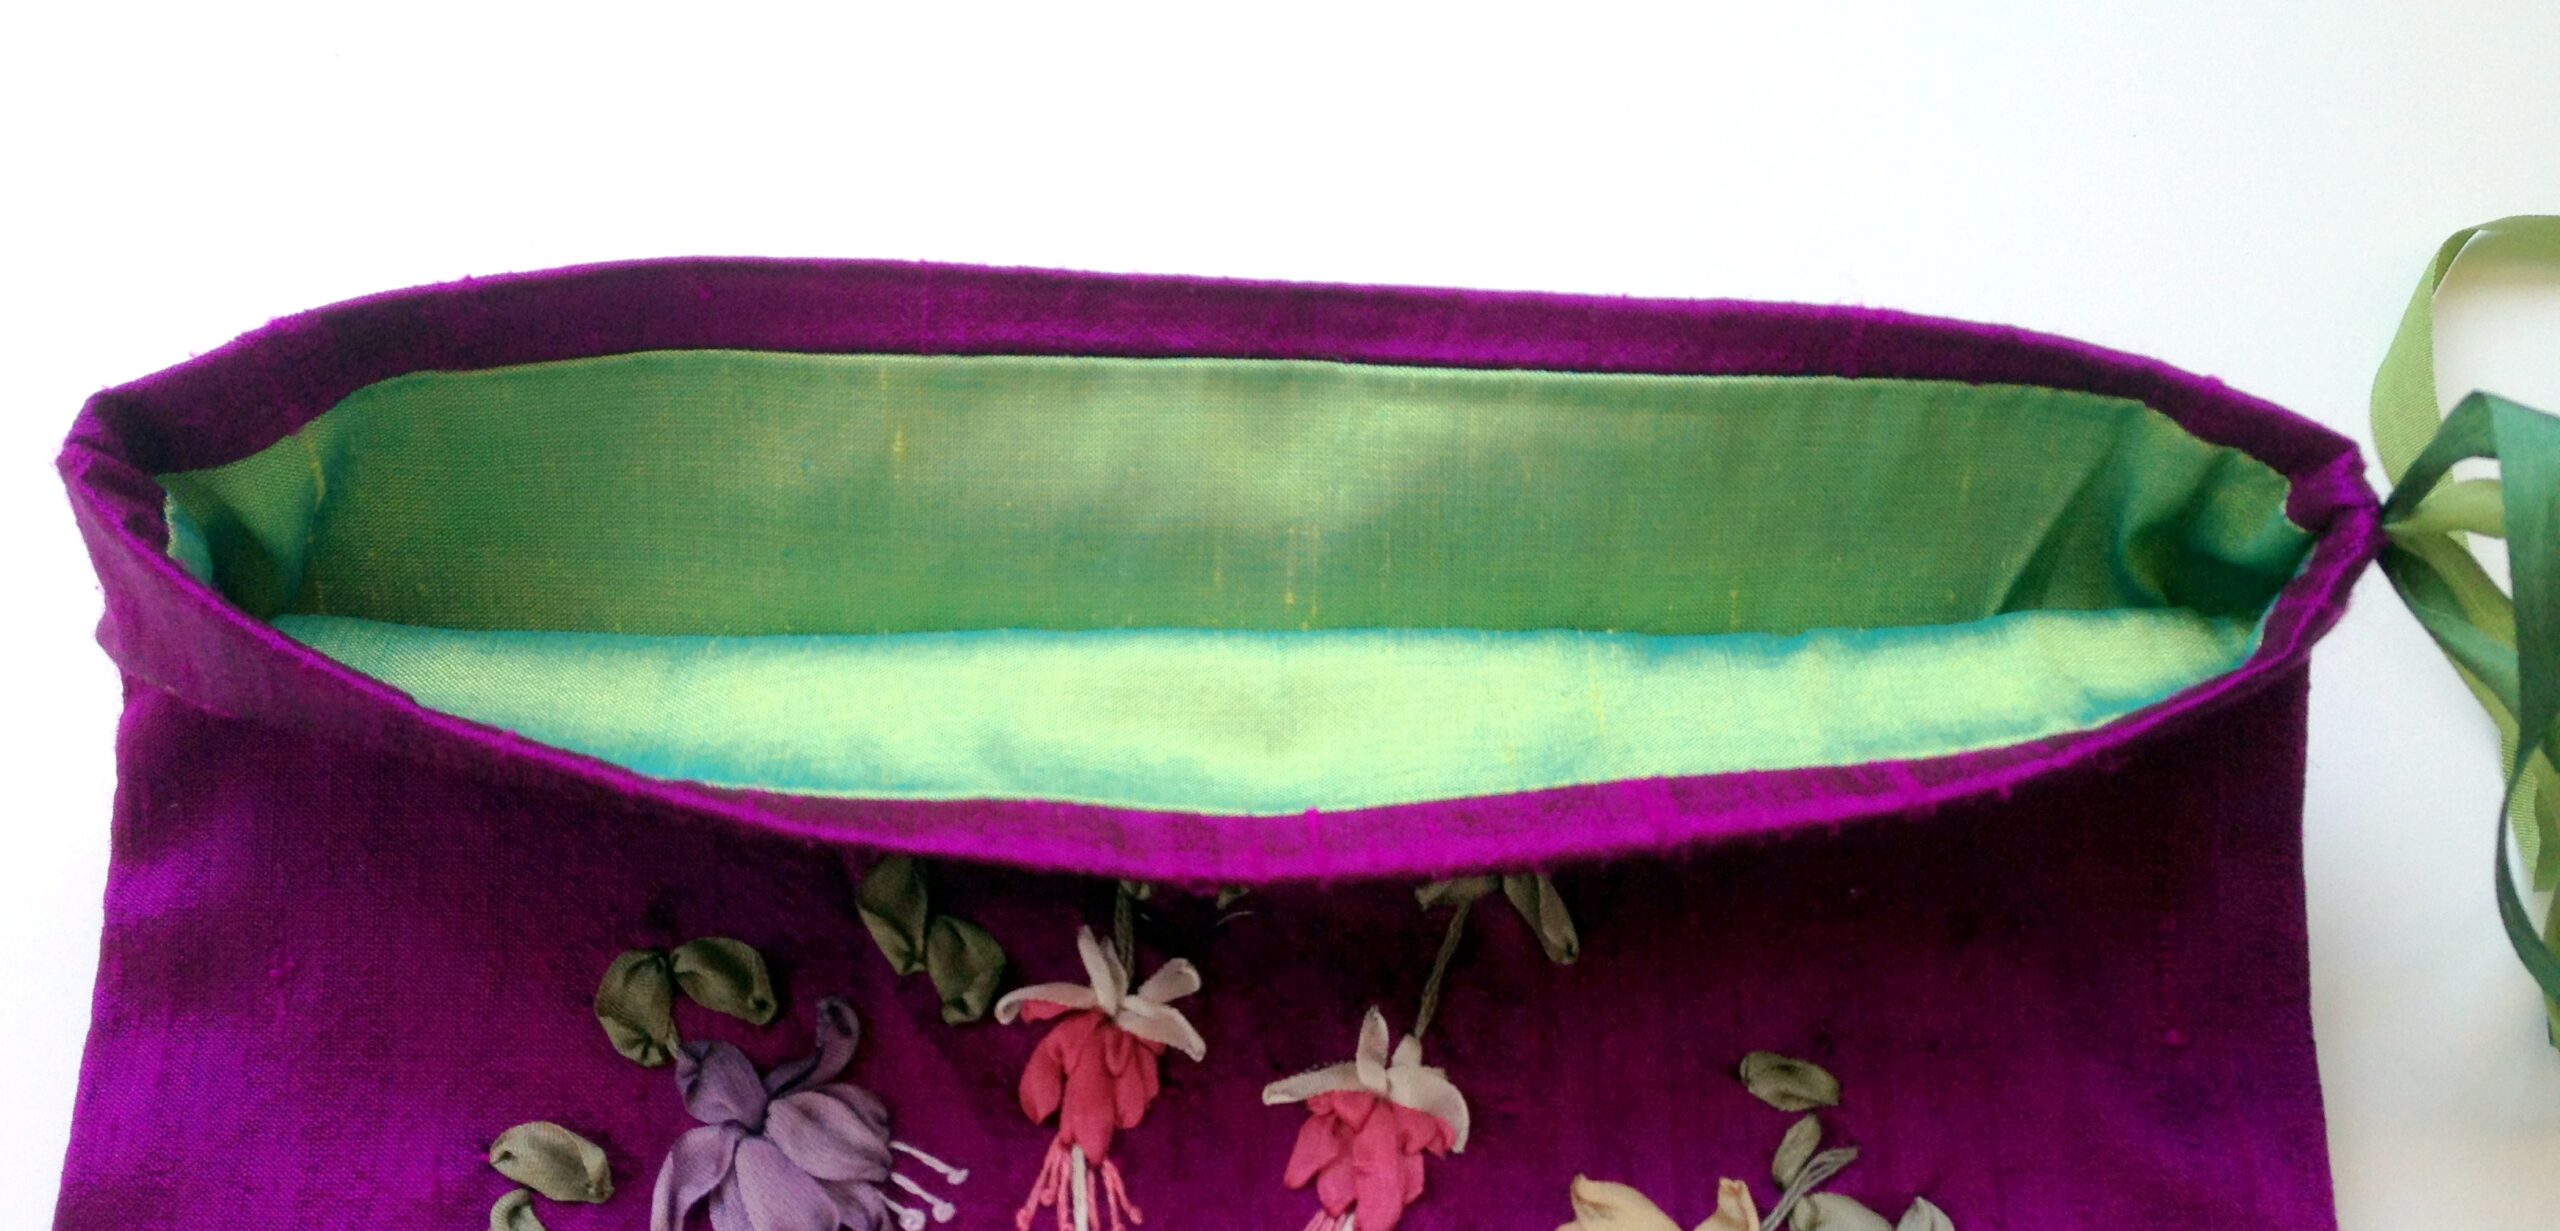 The opening of a purple silk jewellery pouch - the lining is bright green